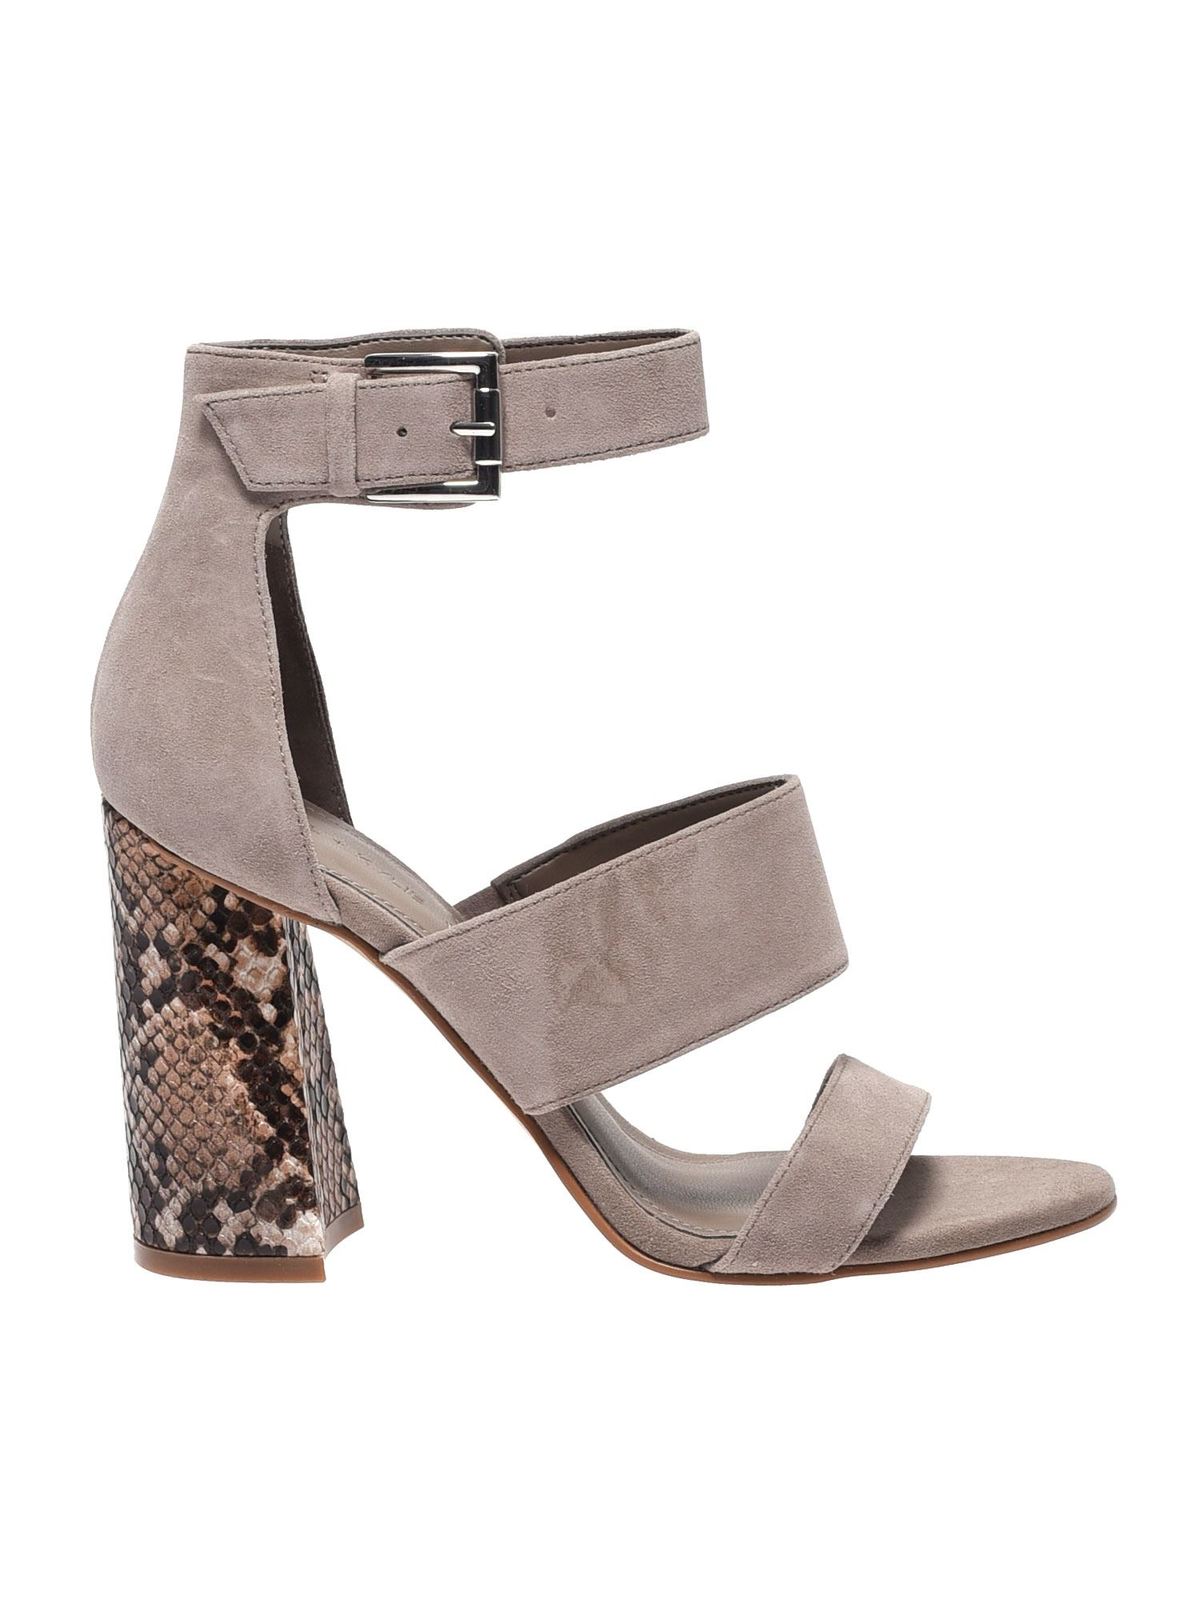 KENDALL + KYLIE TAUPE JAYNE2 SANDALS WITH PYTHON HEEL